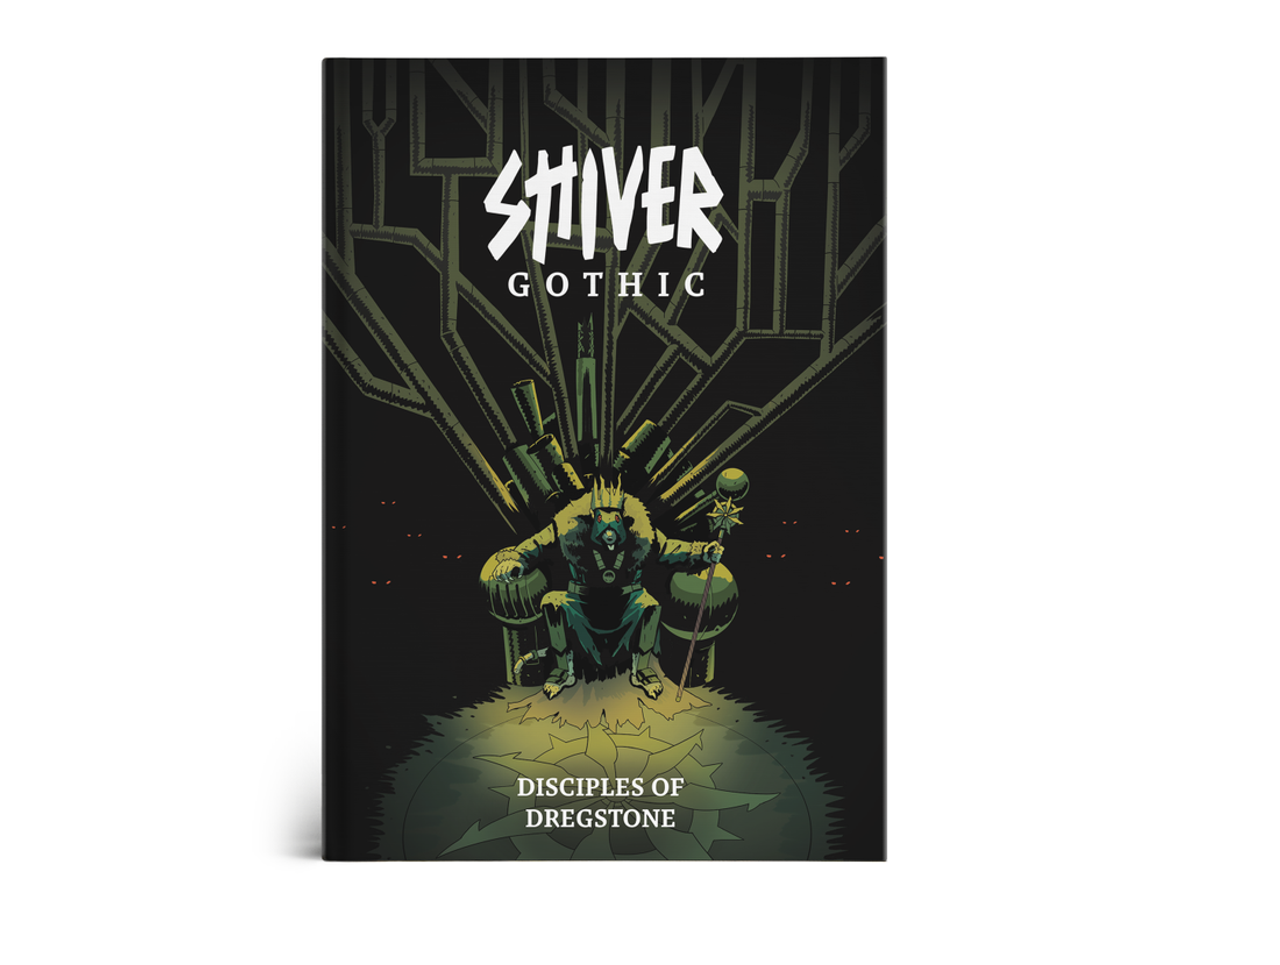 SHIVER Gothic: Disciples of Dregstone | Grognard Games